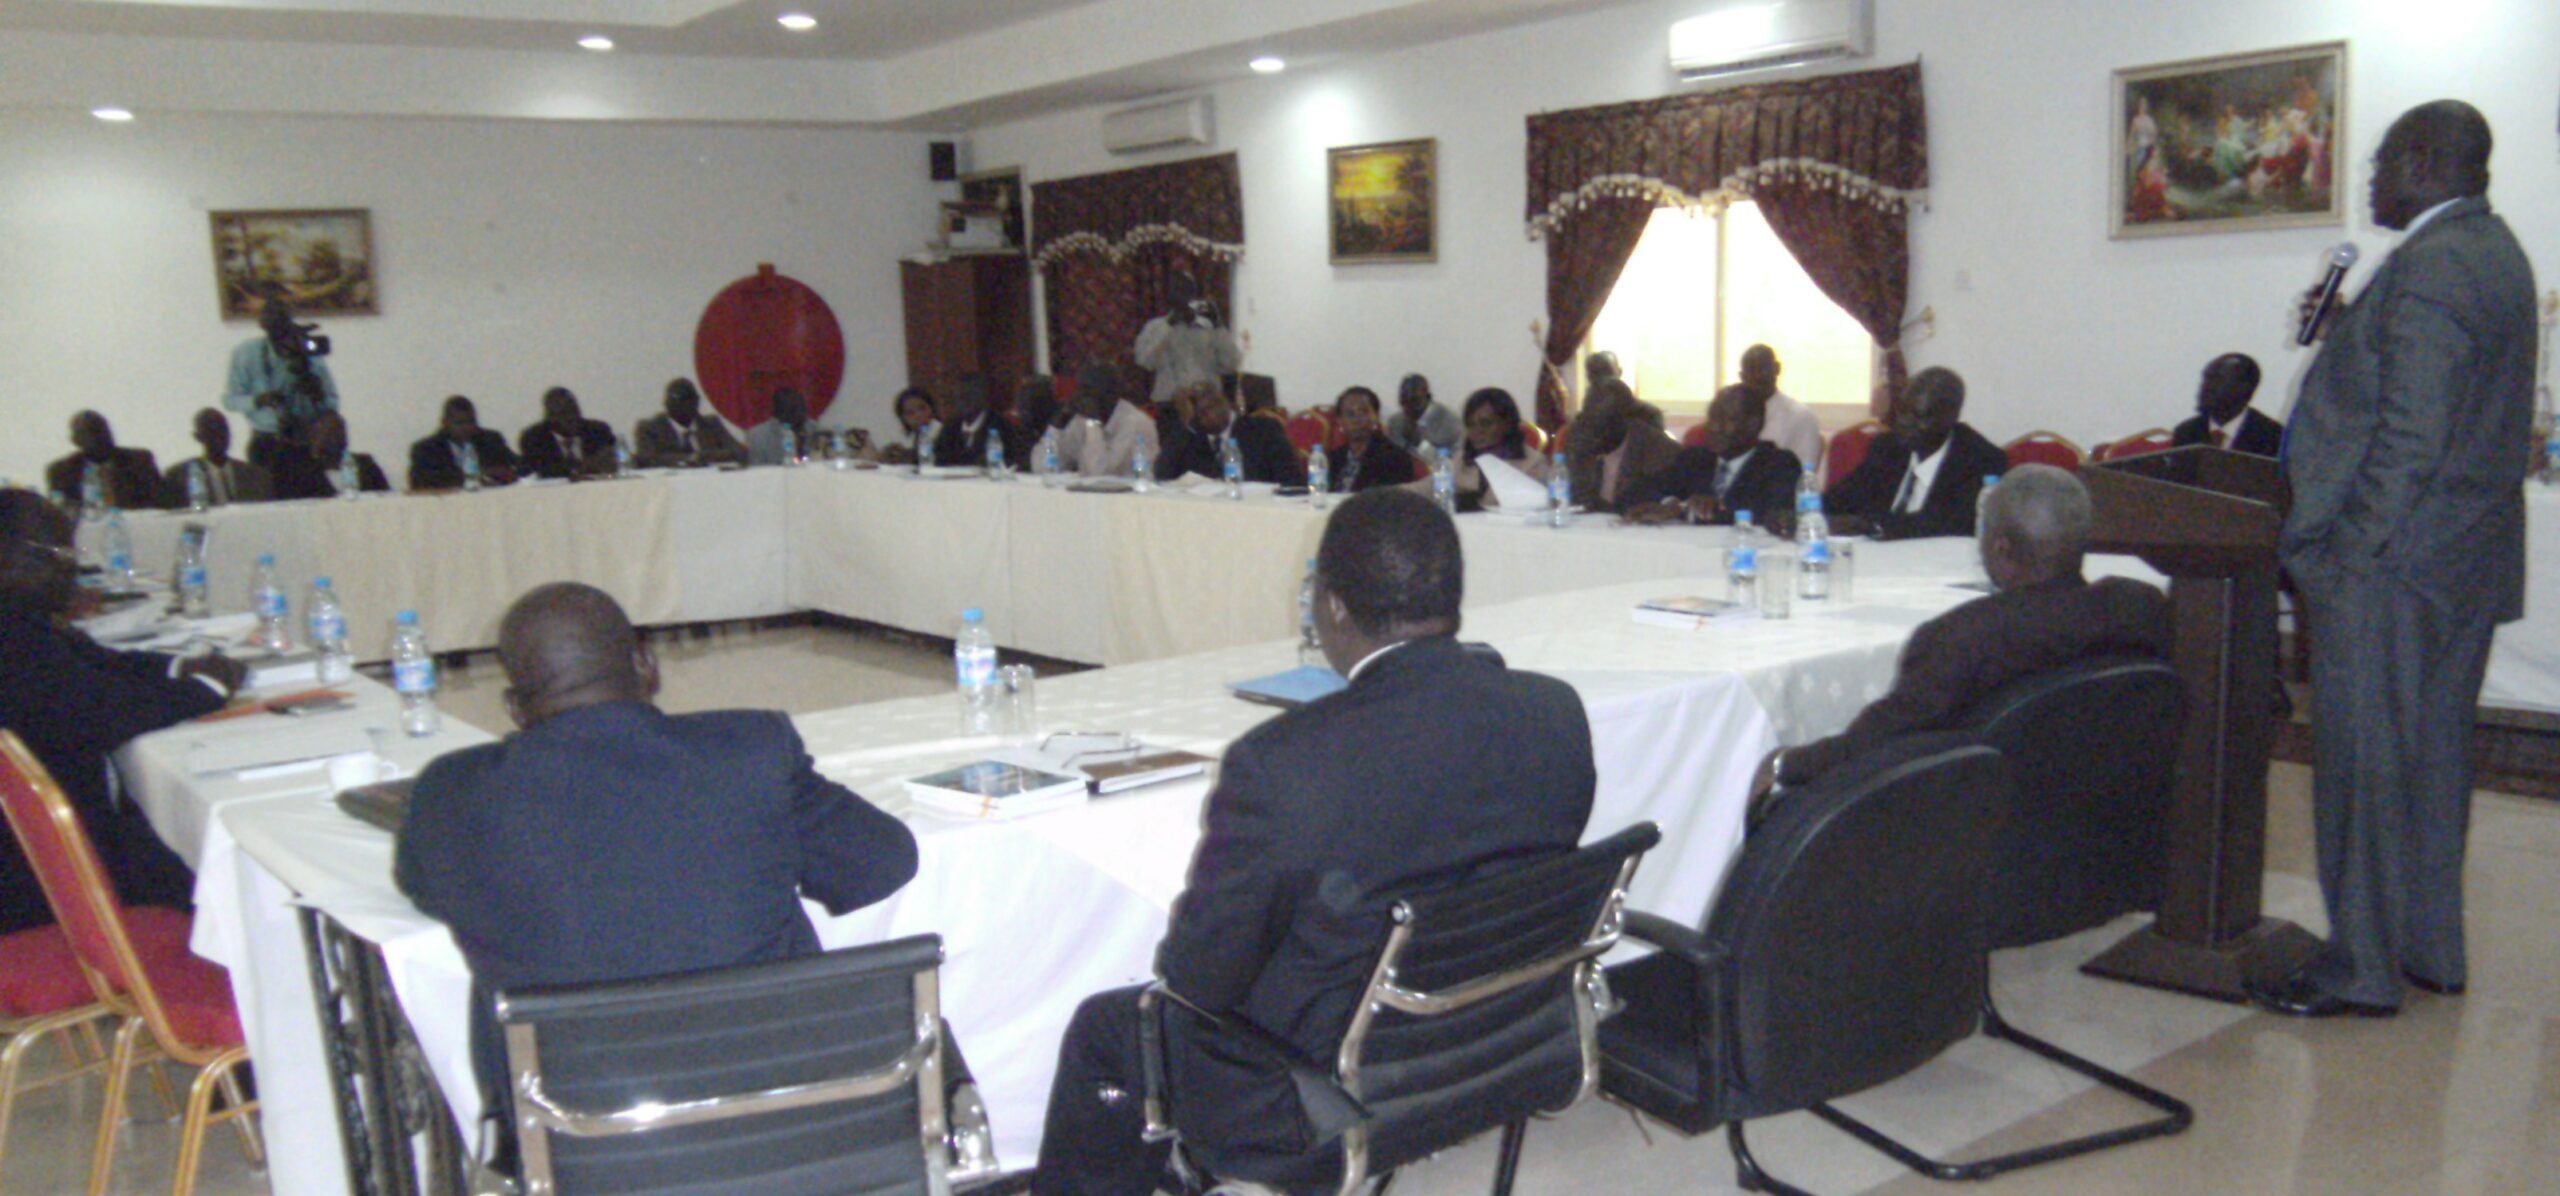 Roundtable national conference on independence and accountability of judiciary in South Sudan, Juba, 5 September 2012 (ST)